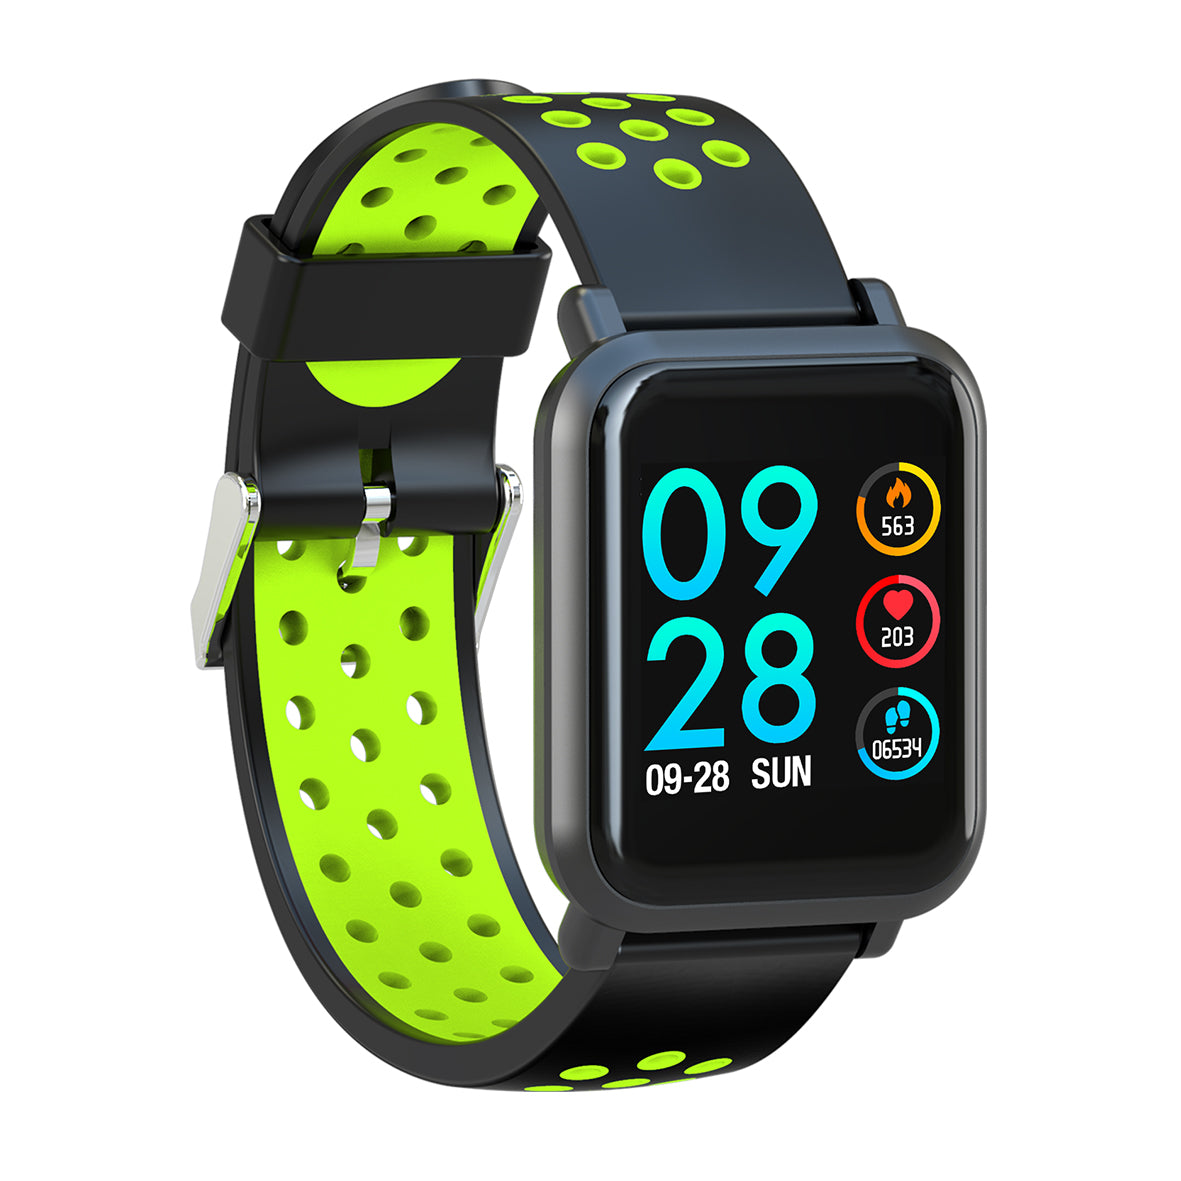 AQFIT Coolfit W8 Smartwatch Price in India  Buy AQFIT Coolfit W8  Smartwatch online at Flipkartcom